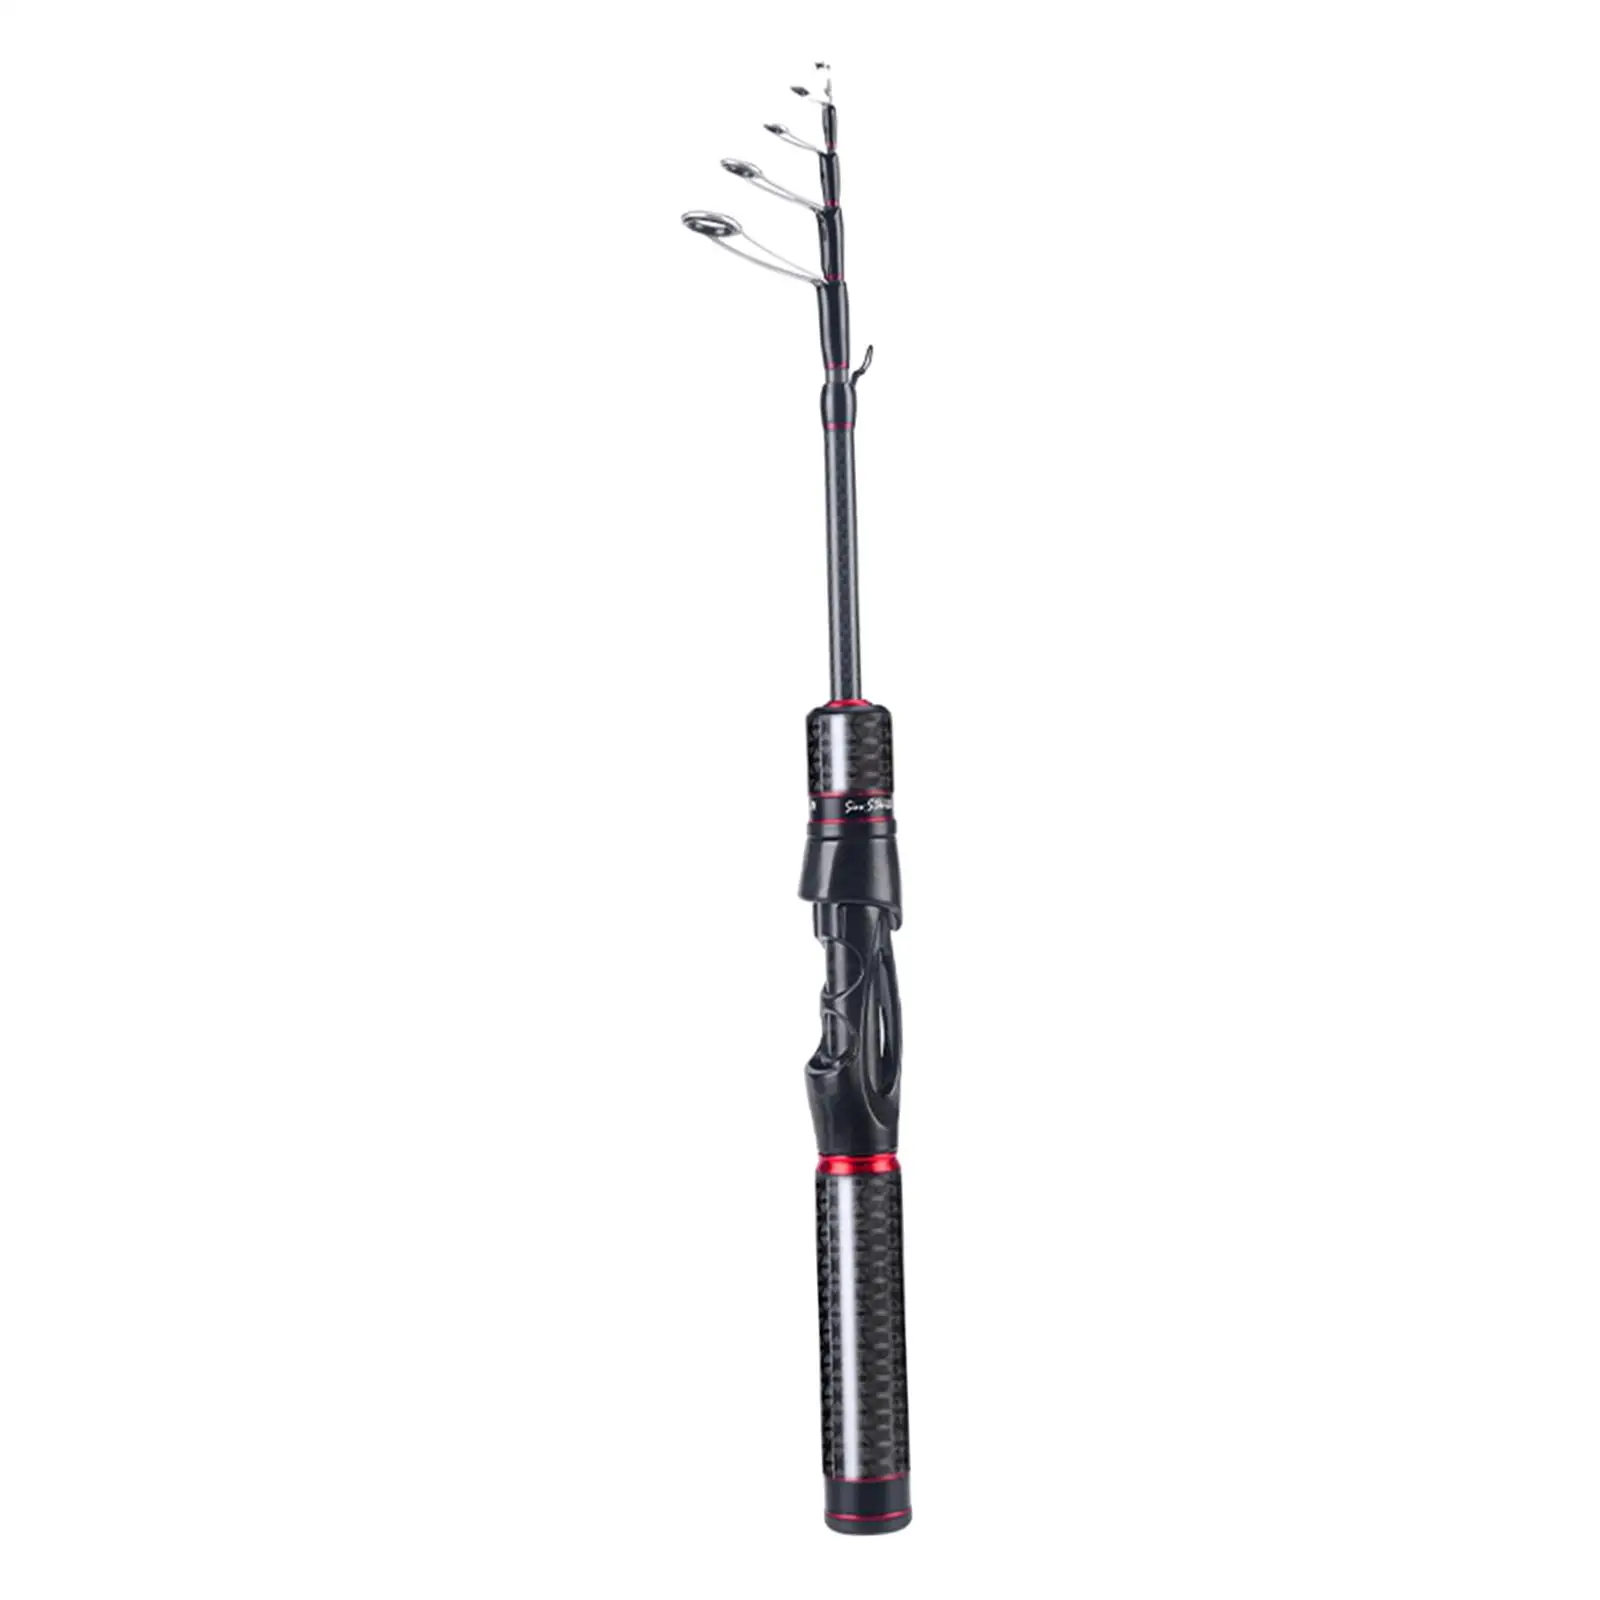 Carbon Fiber Fishing Rod Telescopic Fishing Pole, Casting Fishing Rods, Retractable Handle Fishing Tool for Trout Bass